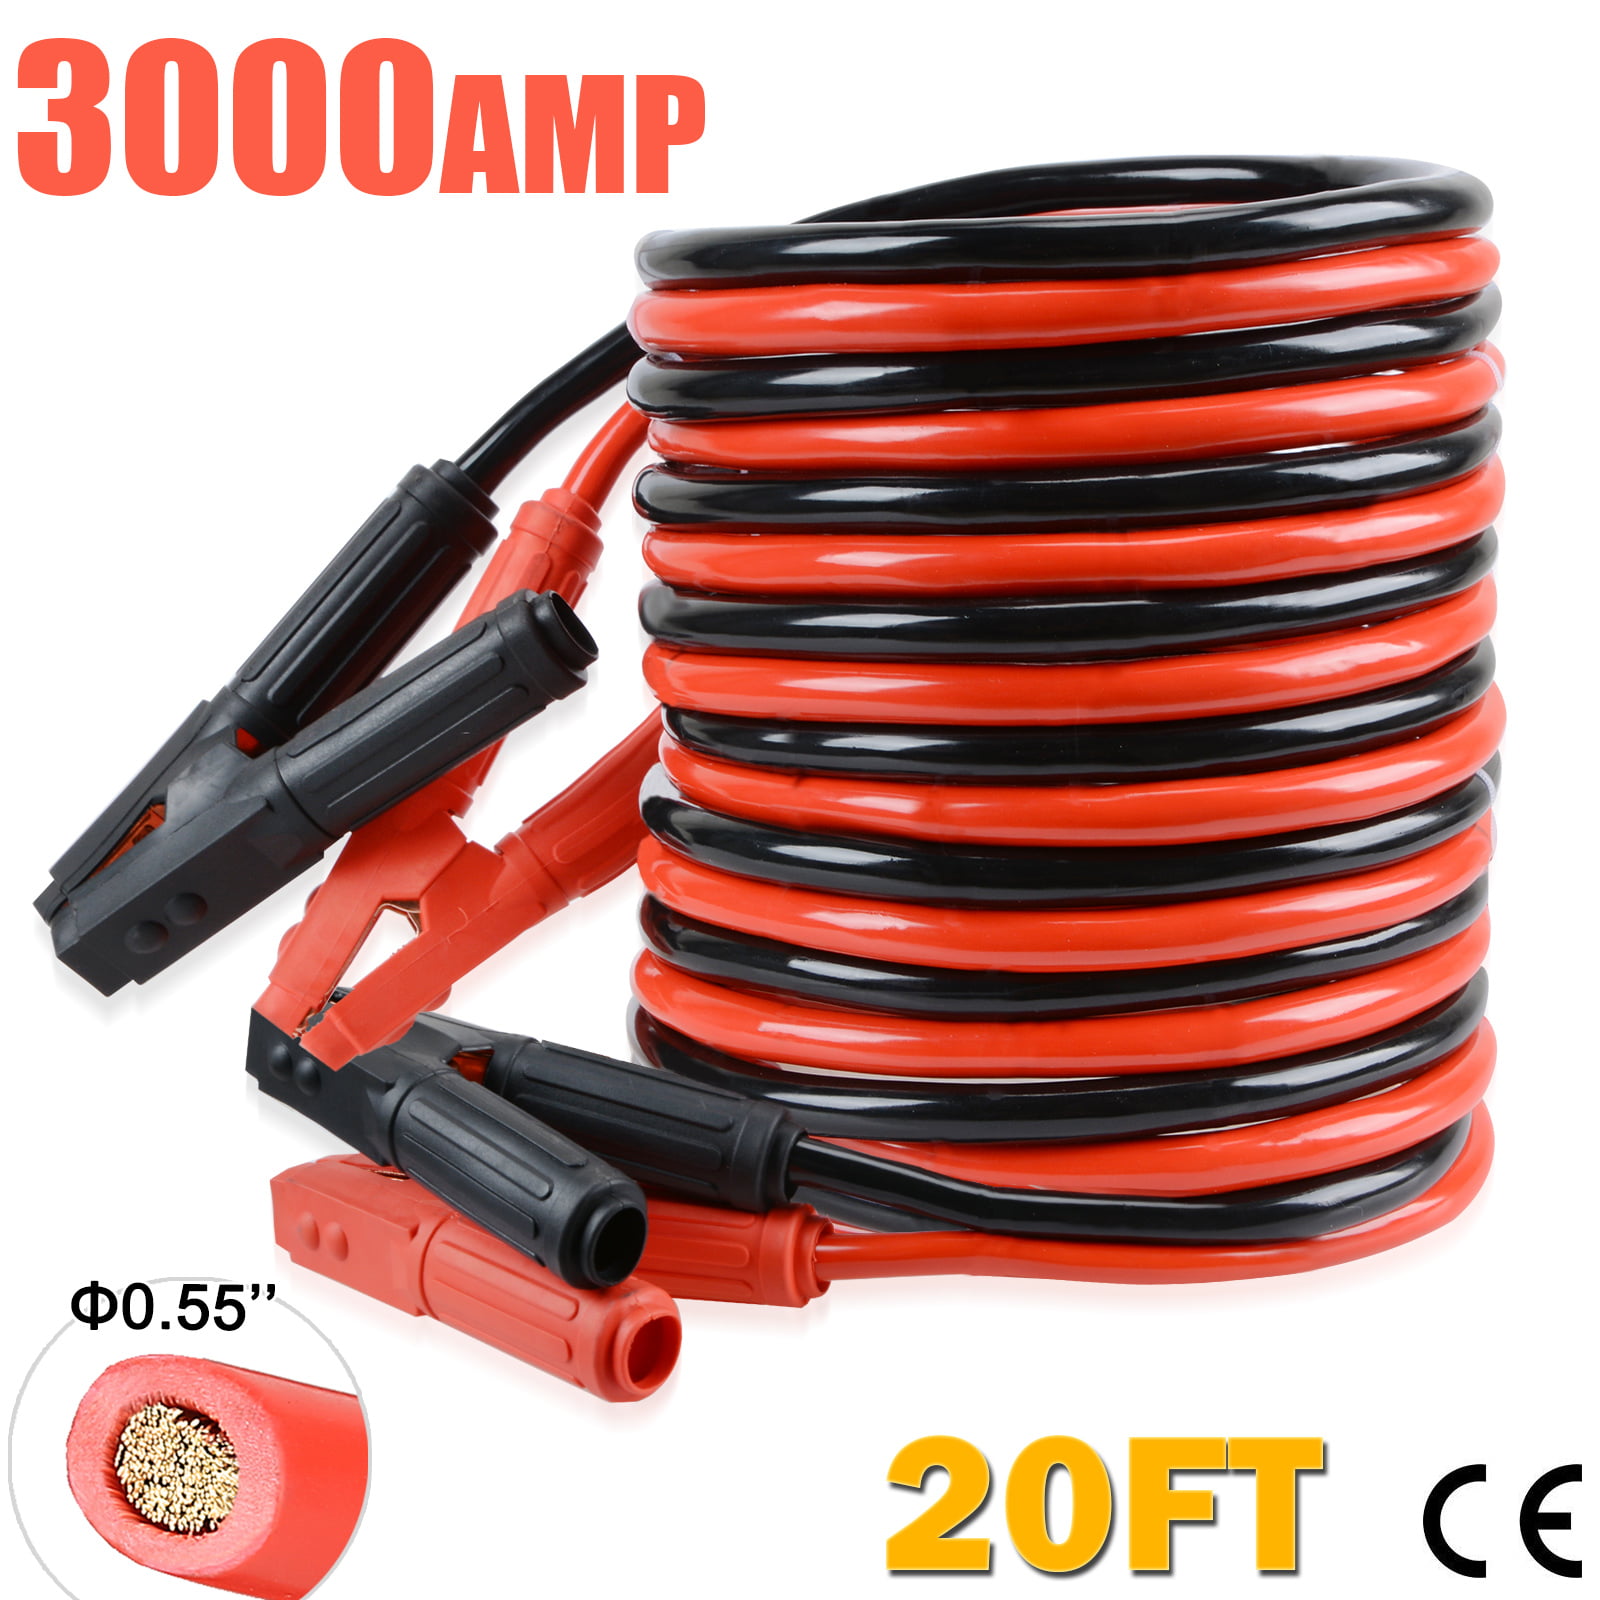 3000AMP Booster Cables 0 Gauge Jumper Leads 20FT Heavy Duty Car Van Clamps Start 